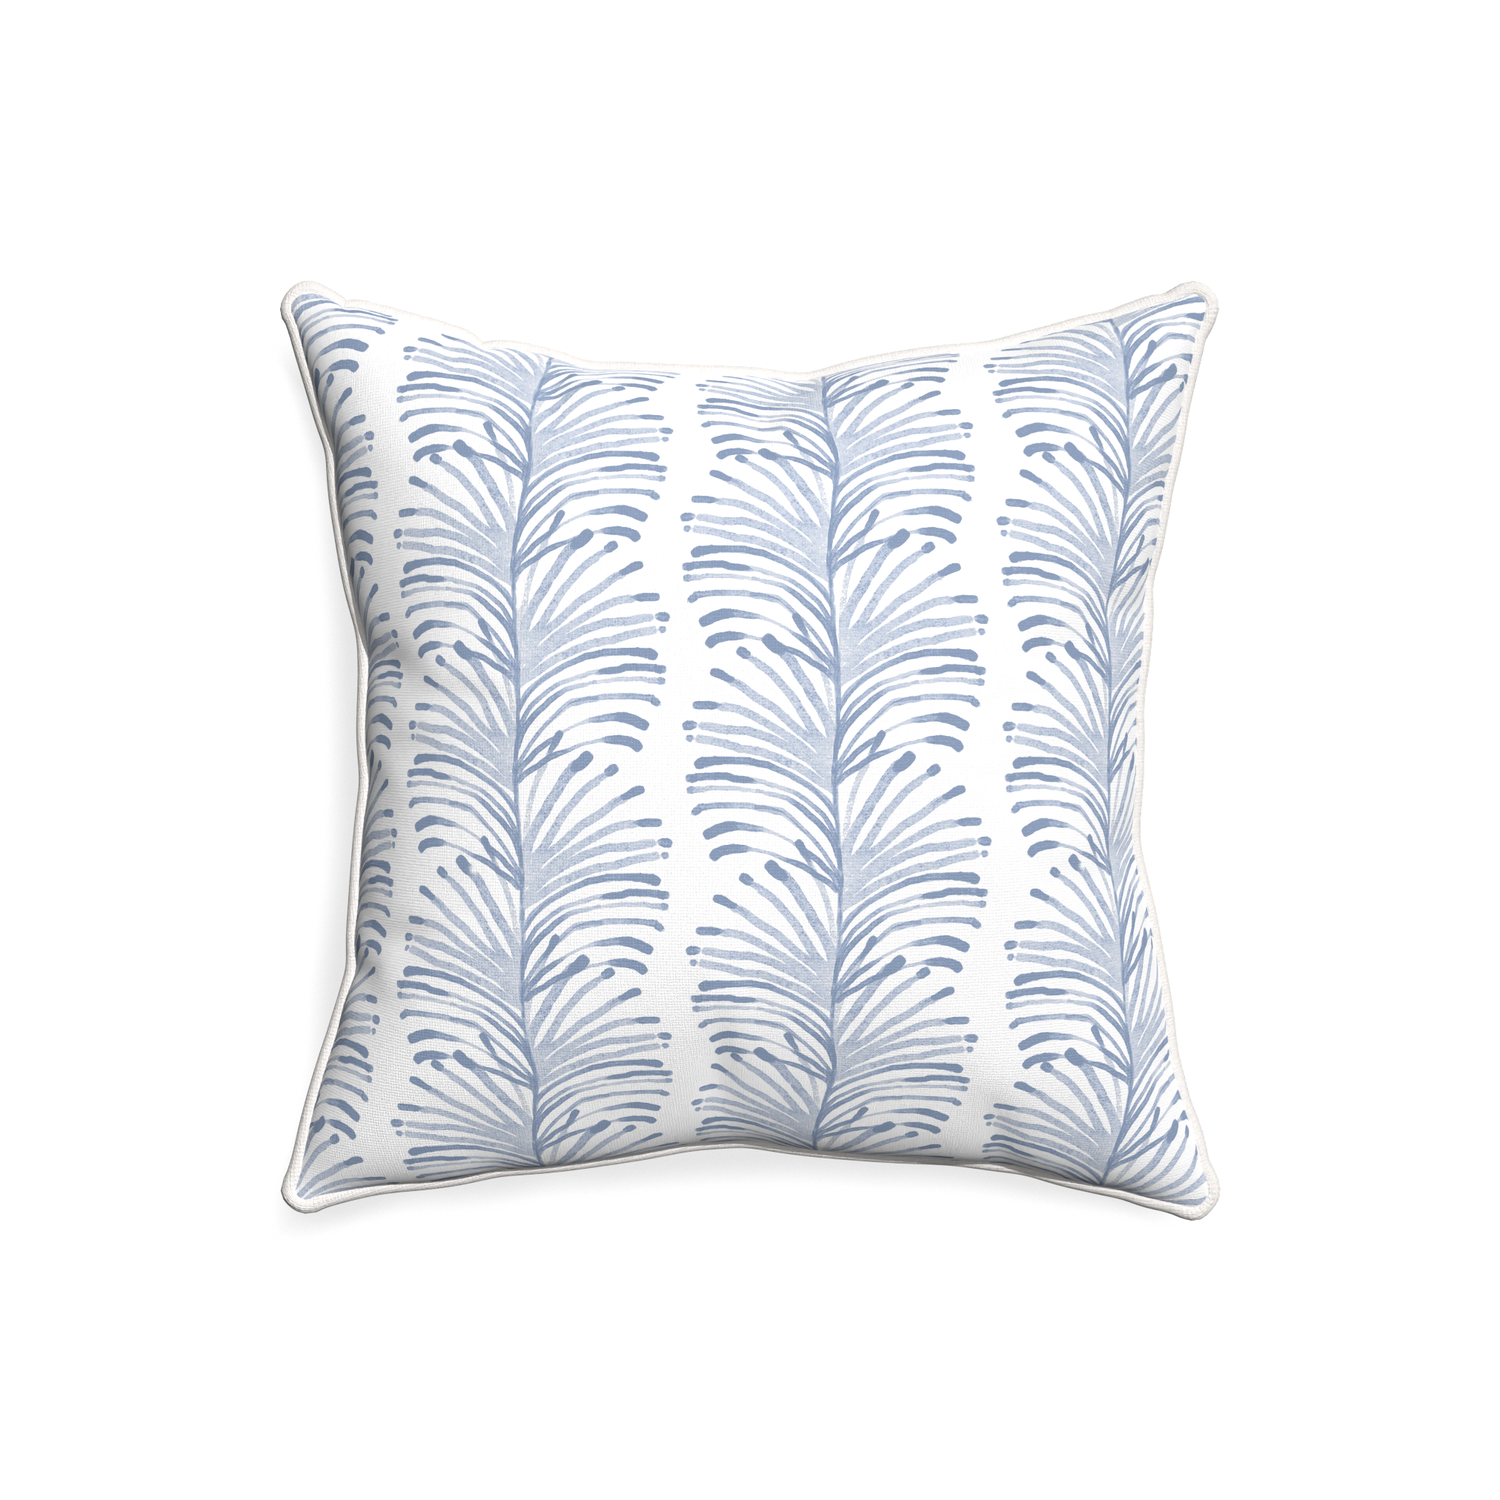 20-square emma sky custom pillow with snow piping on white background